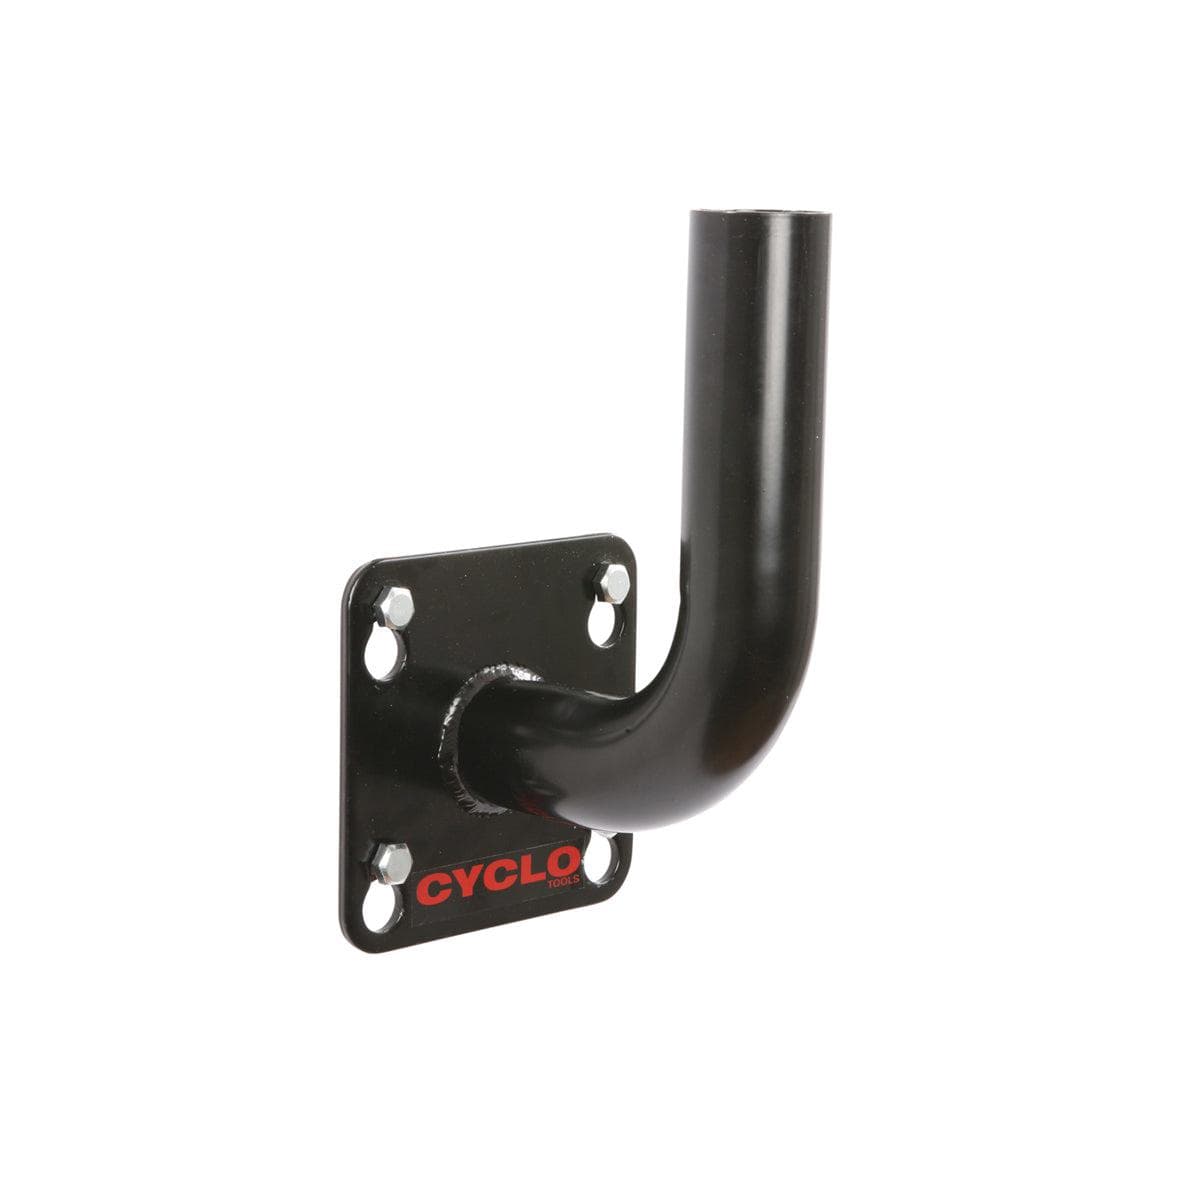 Cyclo Wall Mount (Excludes Clamp Head):